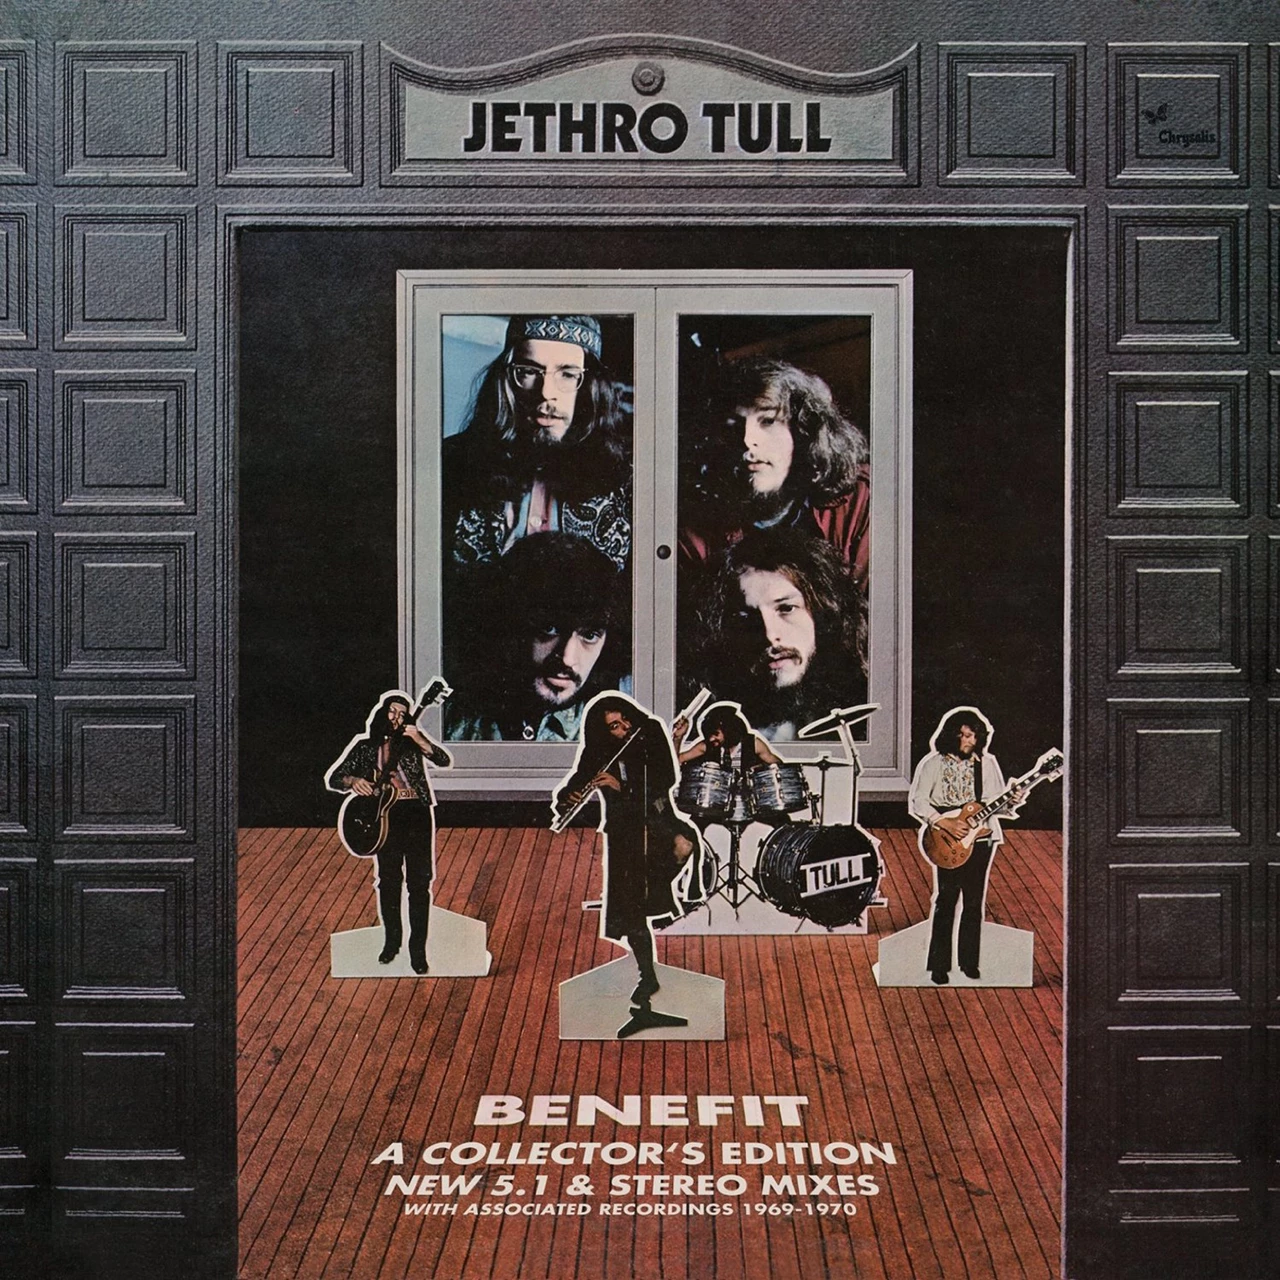 Benefit by Jethro Tull